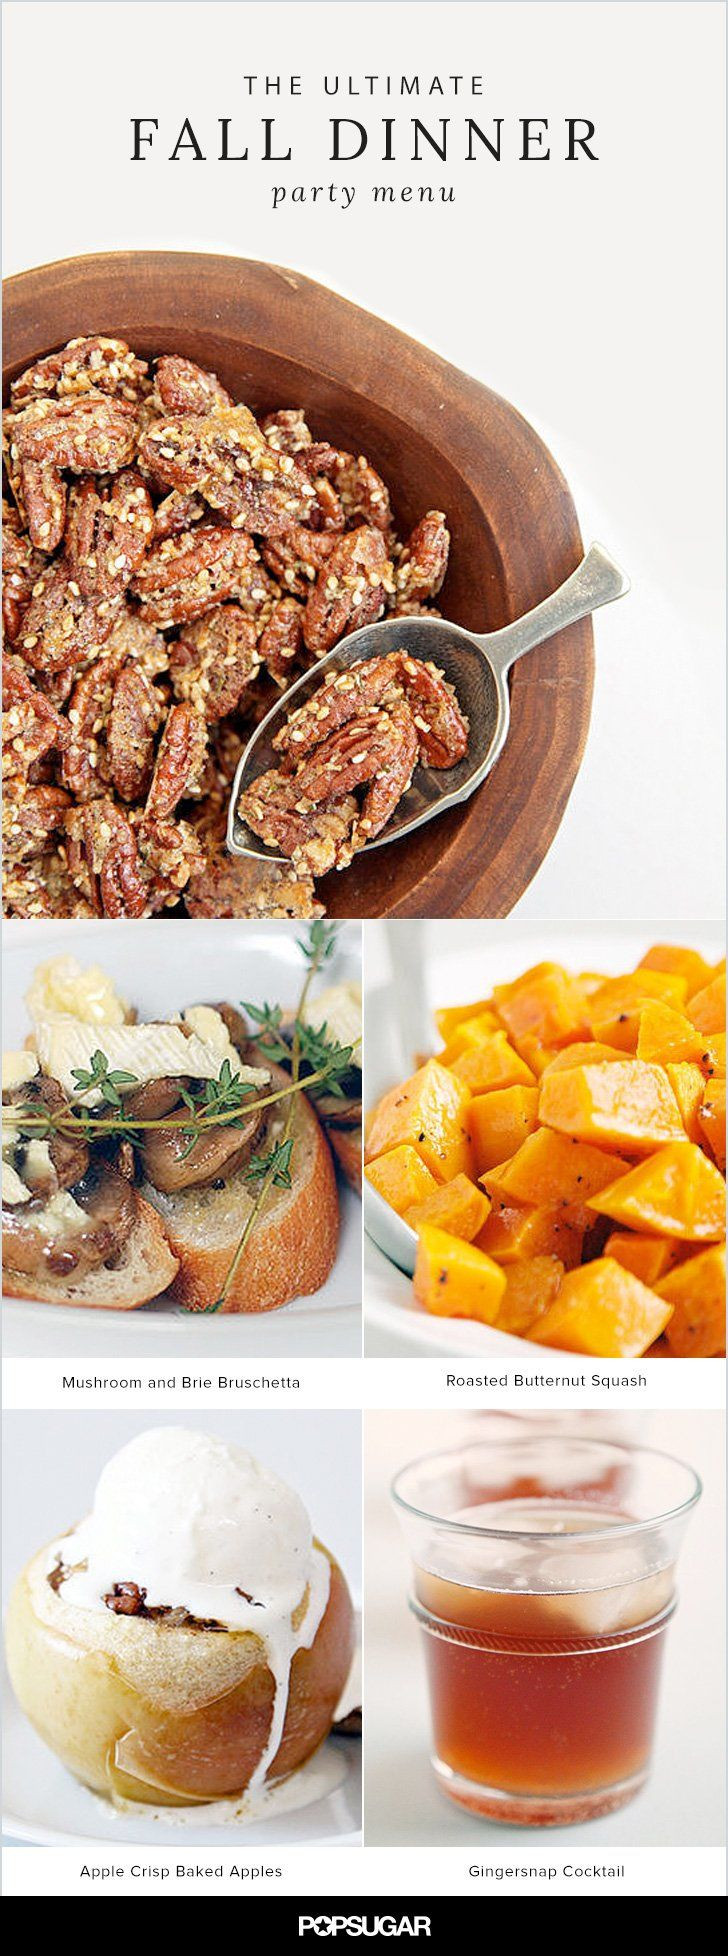 Fall Dinner Party Menu
 The Ultimate Fall Dinner Party Menu